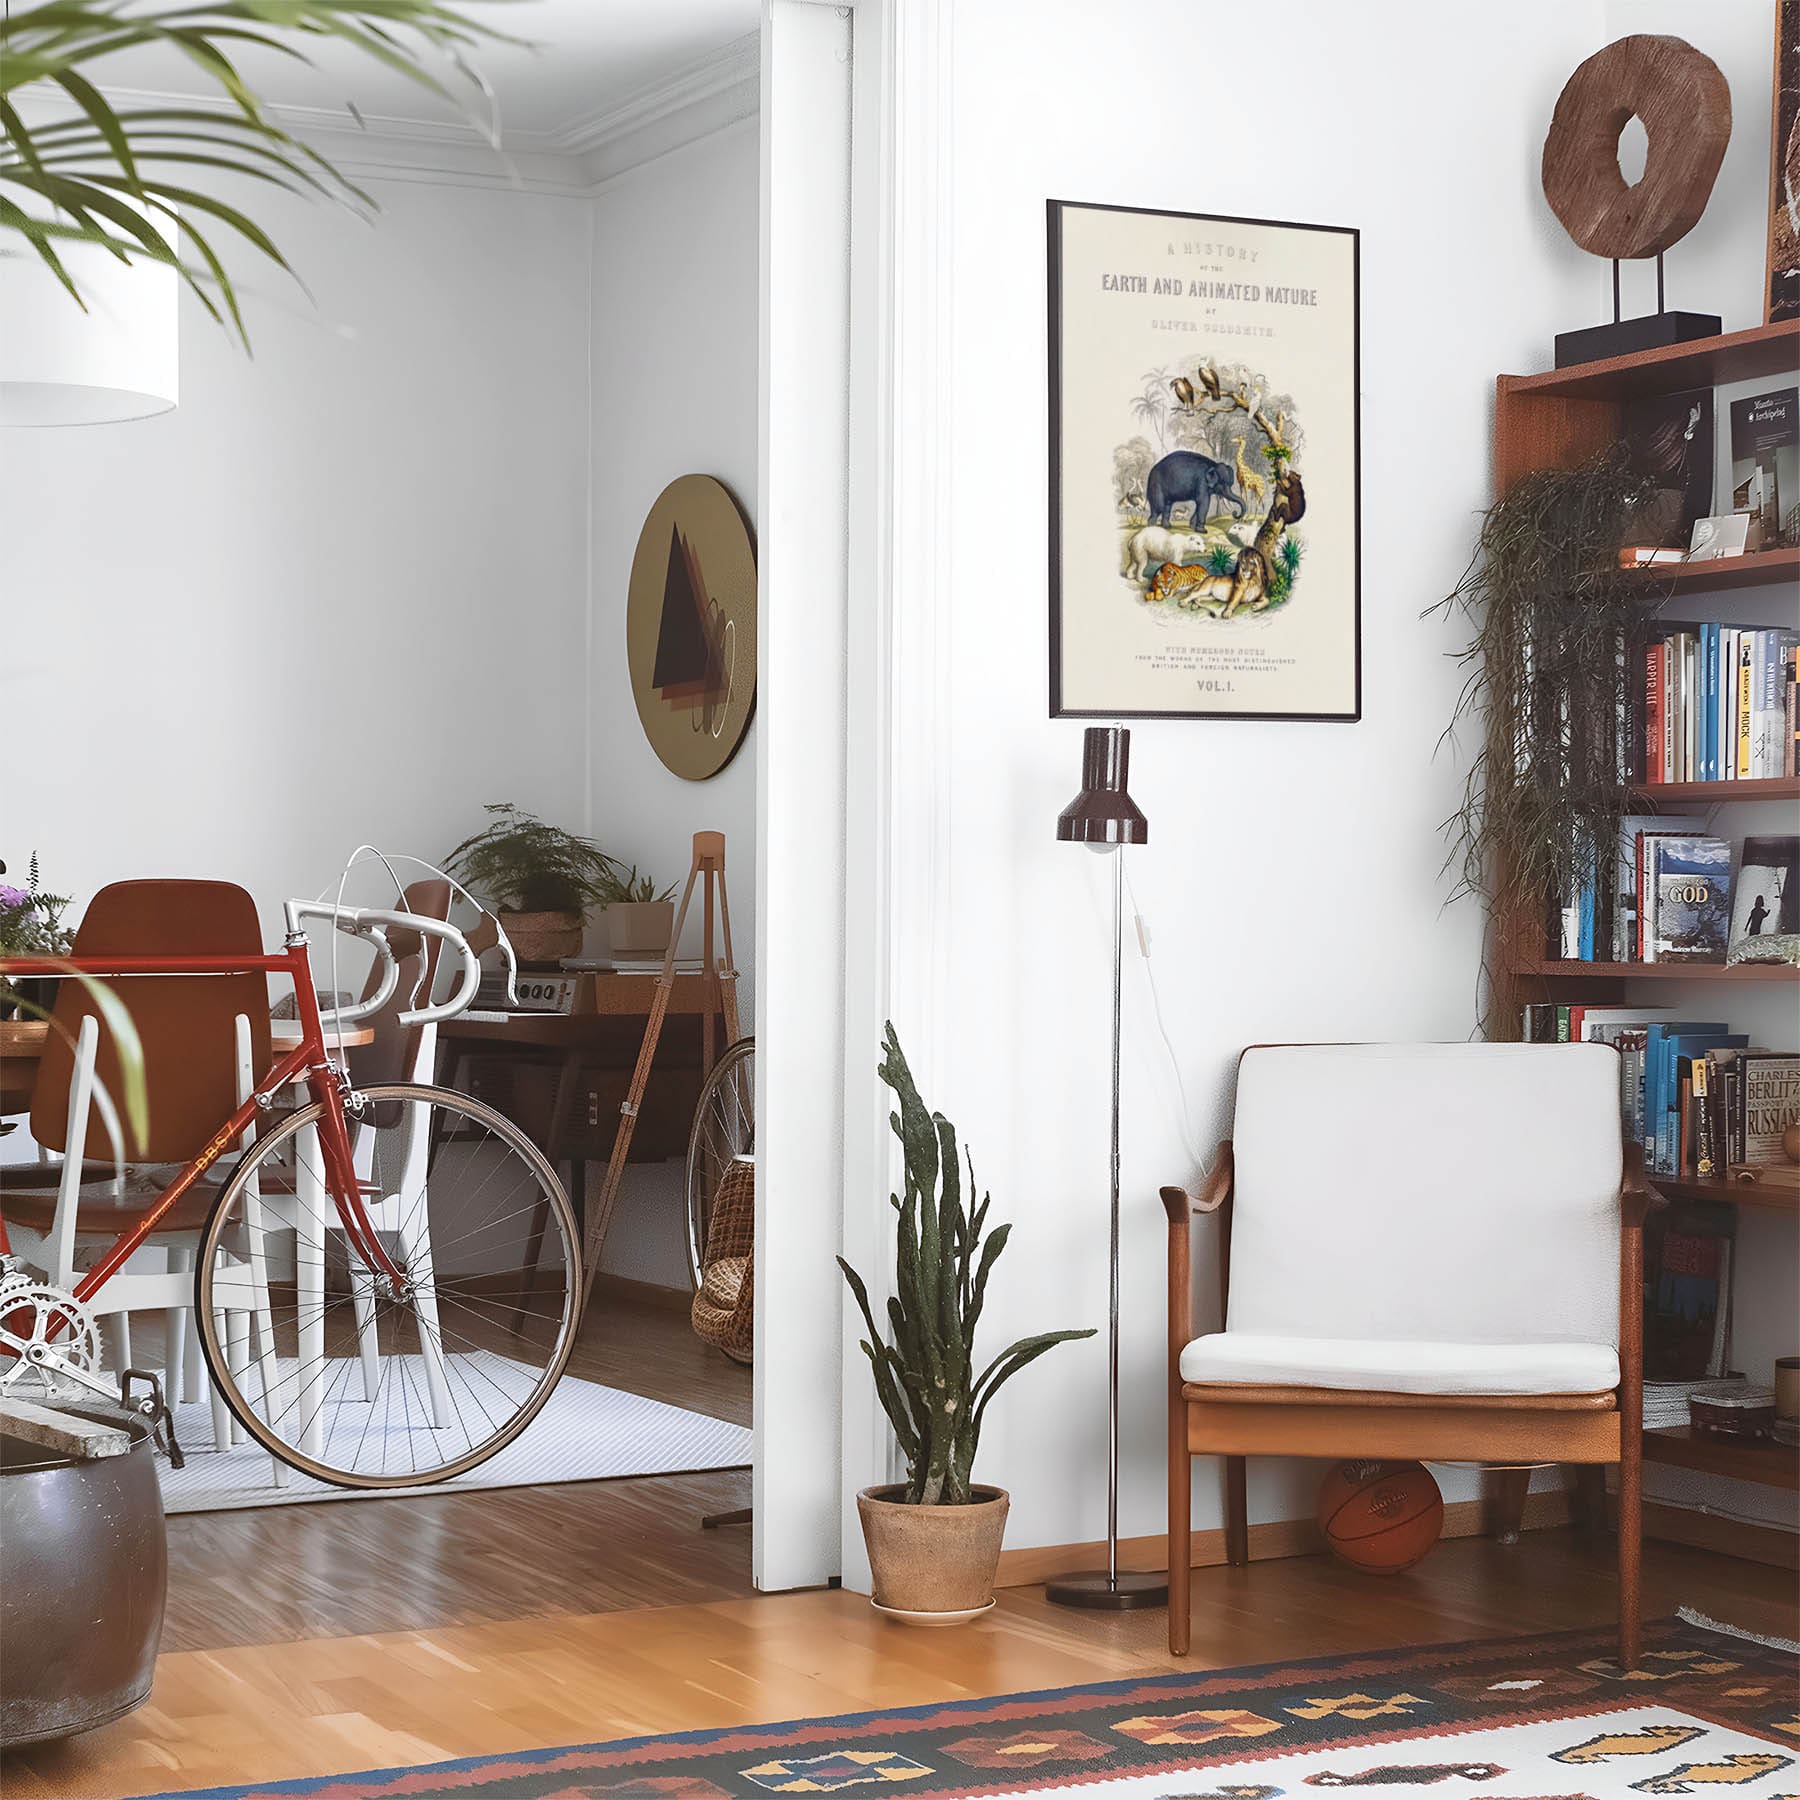 Eclectic living room with a road bike, bookshelf and house plants that features framed artwork of a Wild Animal Book Cover above a chair and lamp